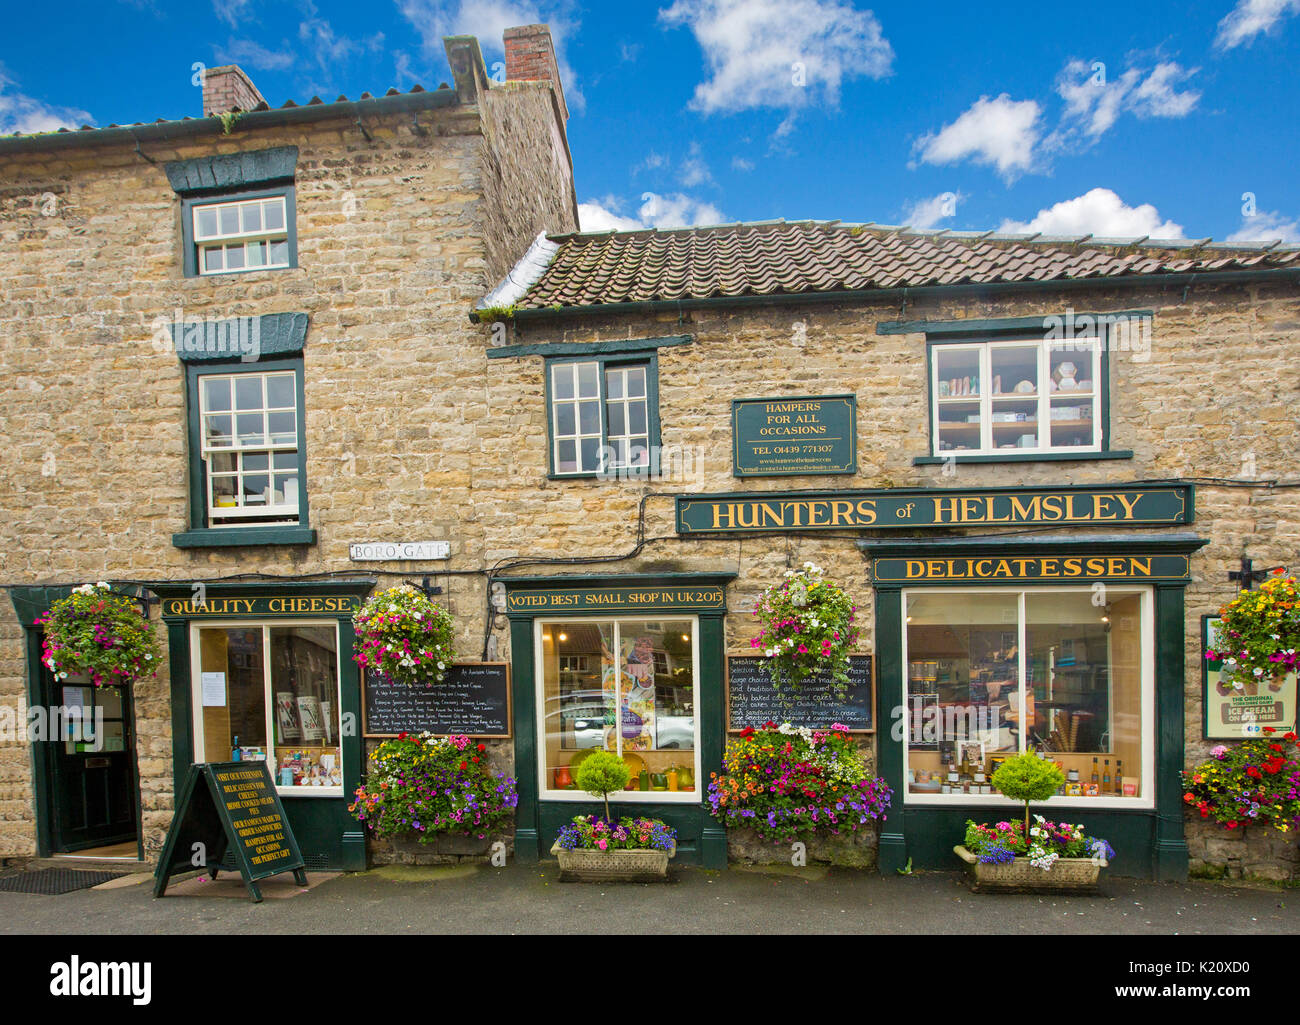 Hunters of Helmsley, delicatessen in historic building with stunning display of hanging baskets & tubs of flowers in village in Yorkshire, England Stock Photo